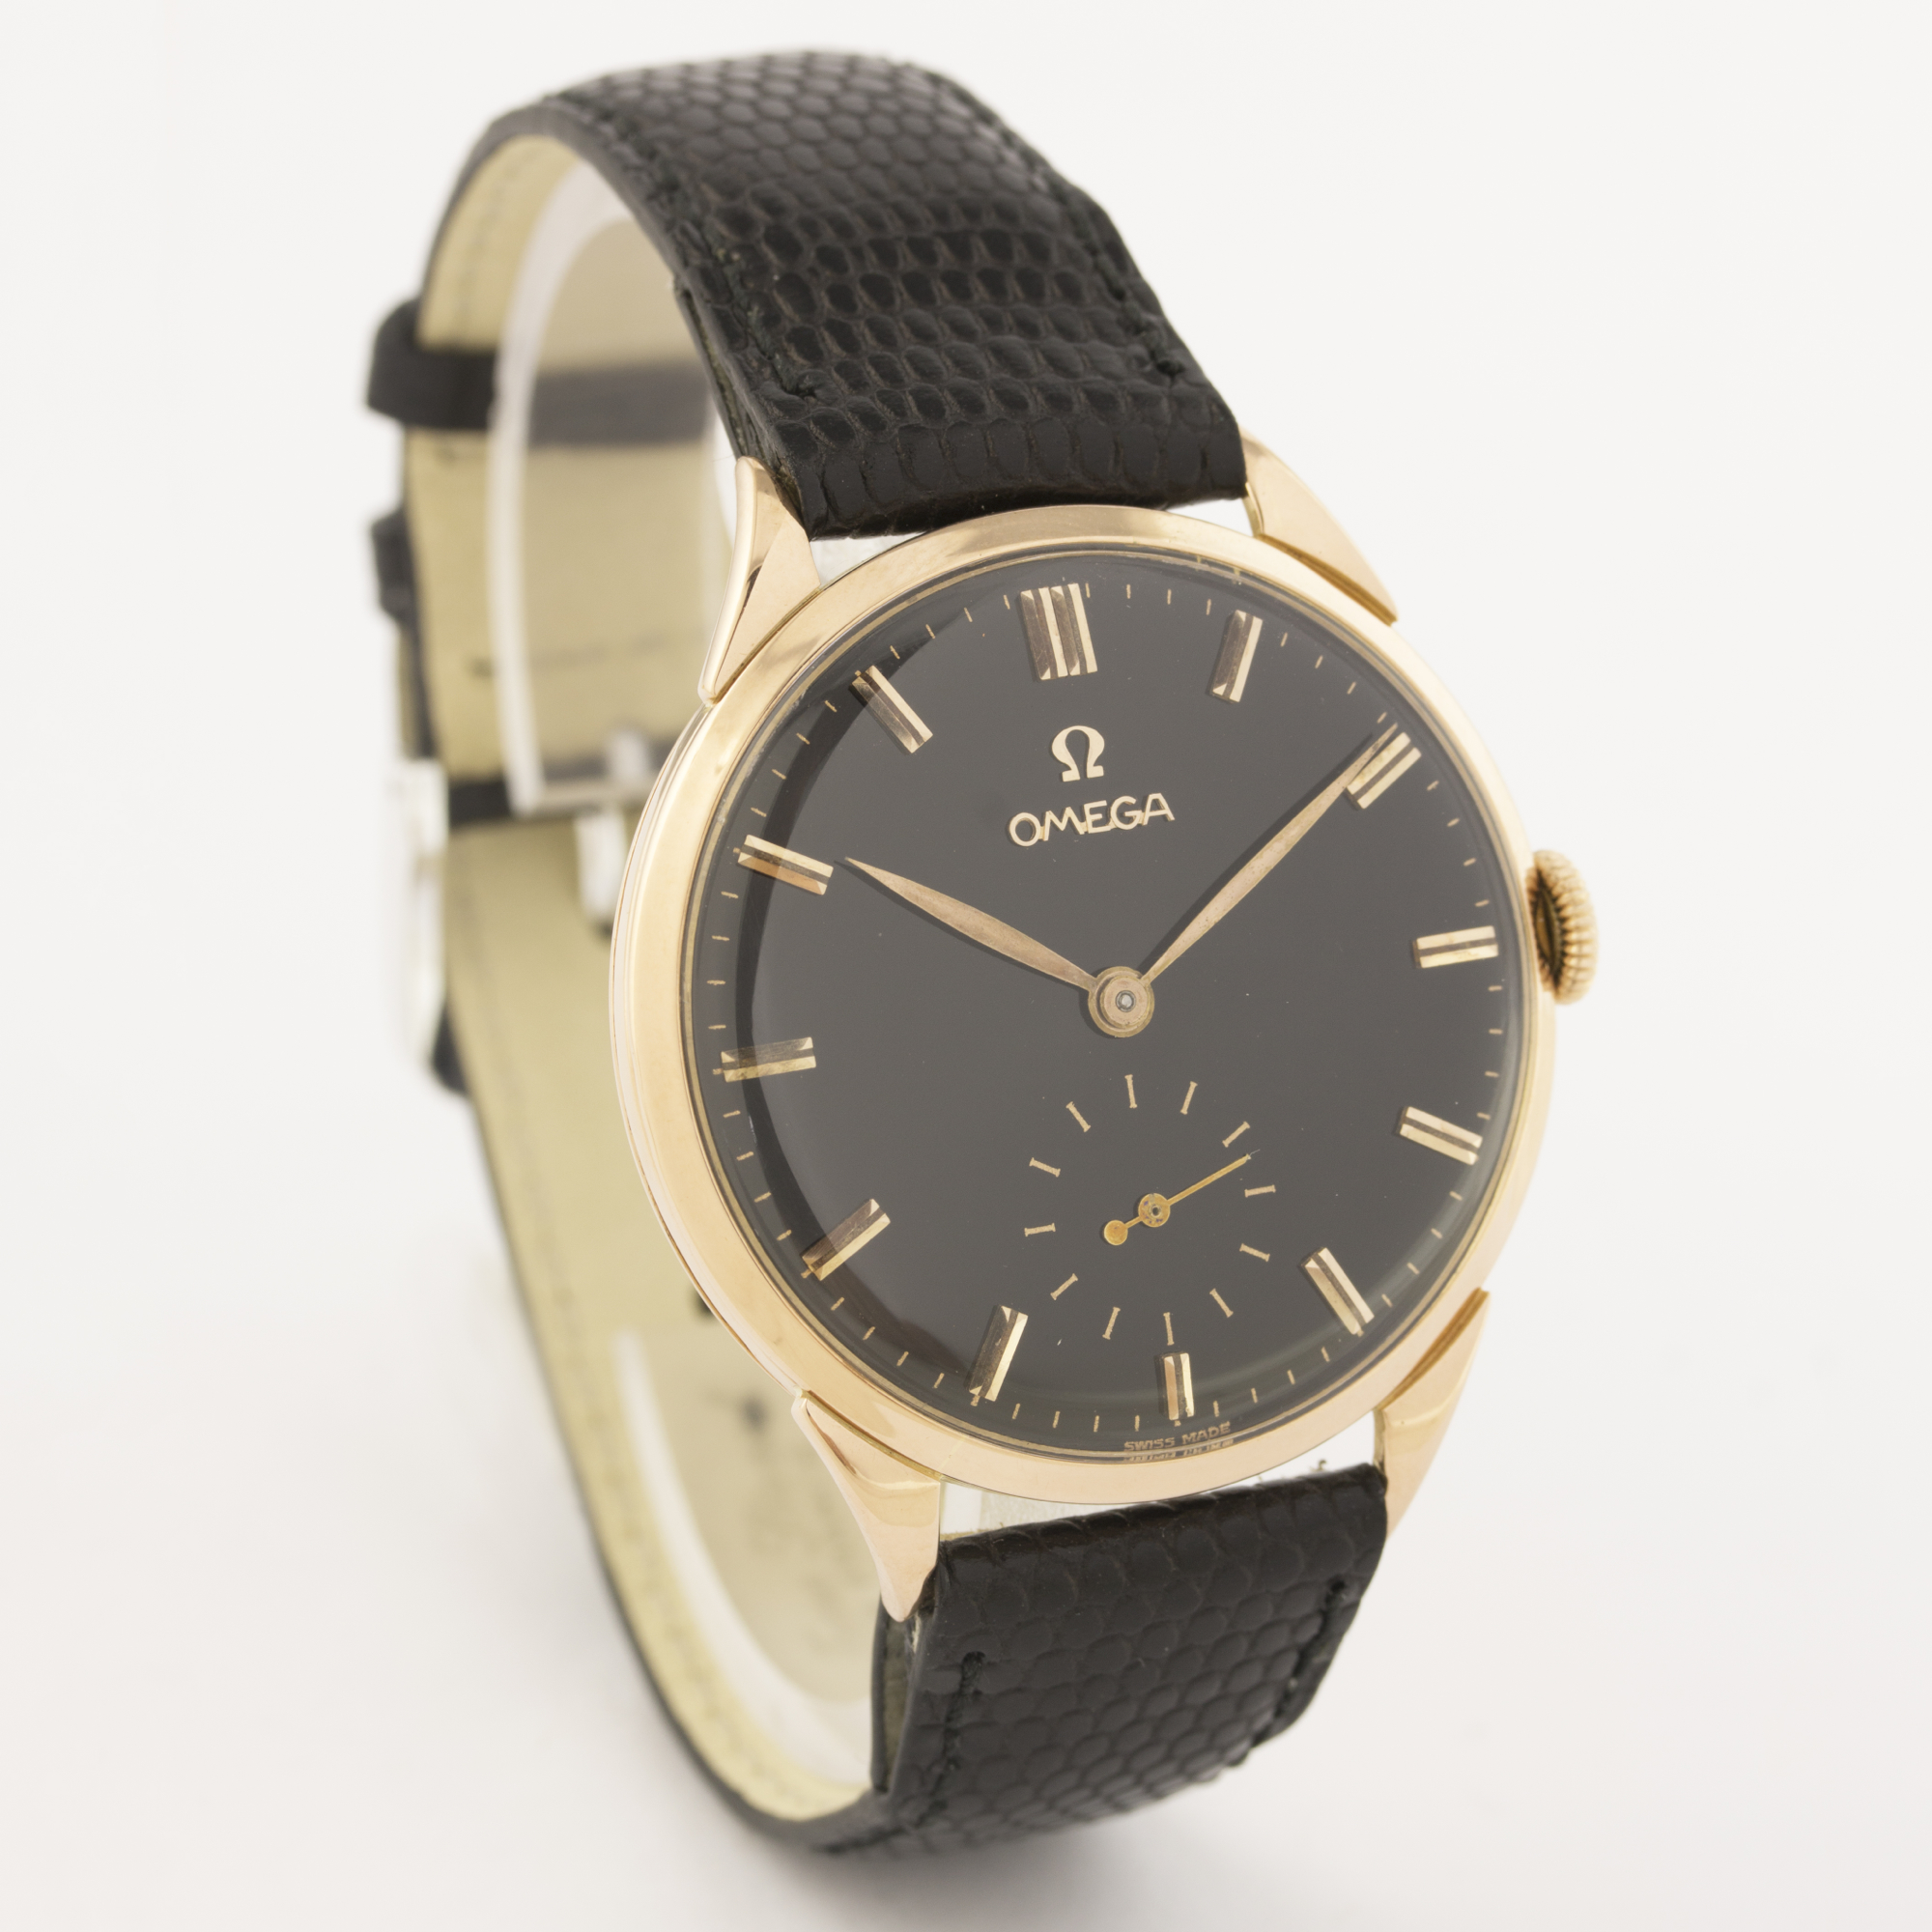 A GENTLEMAN'S LARGE SIZE 18K SOLID PINK GOLD OMEGA WRIST WATCH CIRCA 1950s, REF. 2619 D: Gloss black - Image 4 of 7